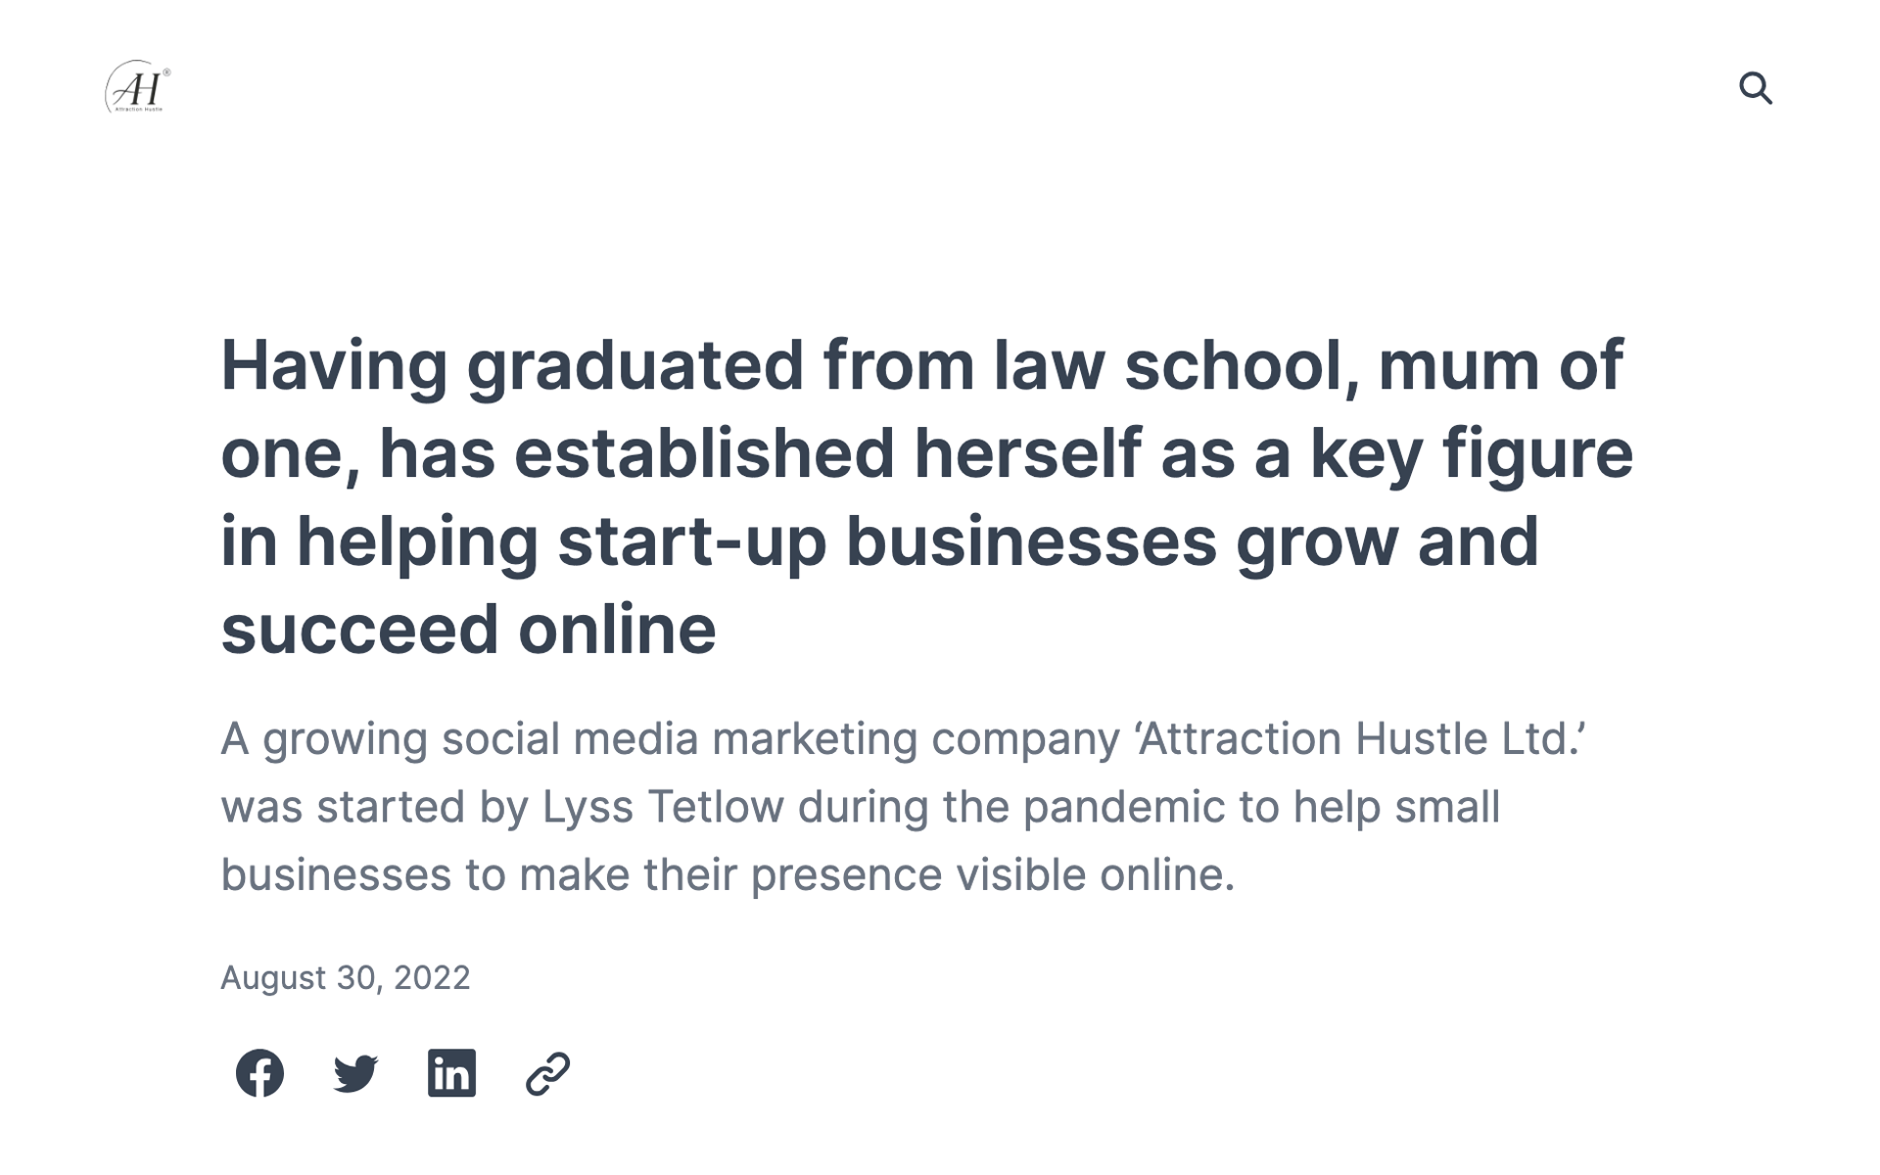 Having graduated from law school, mum of one, has established herself as a key figure in helping start-up businesses grow and succeed online